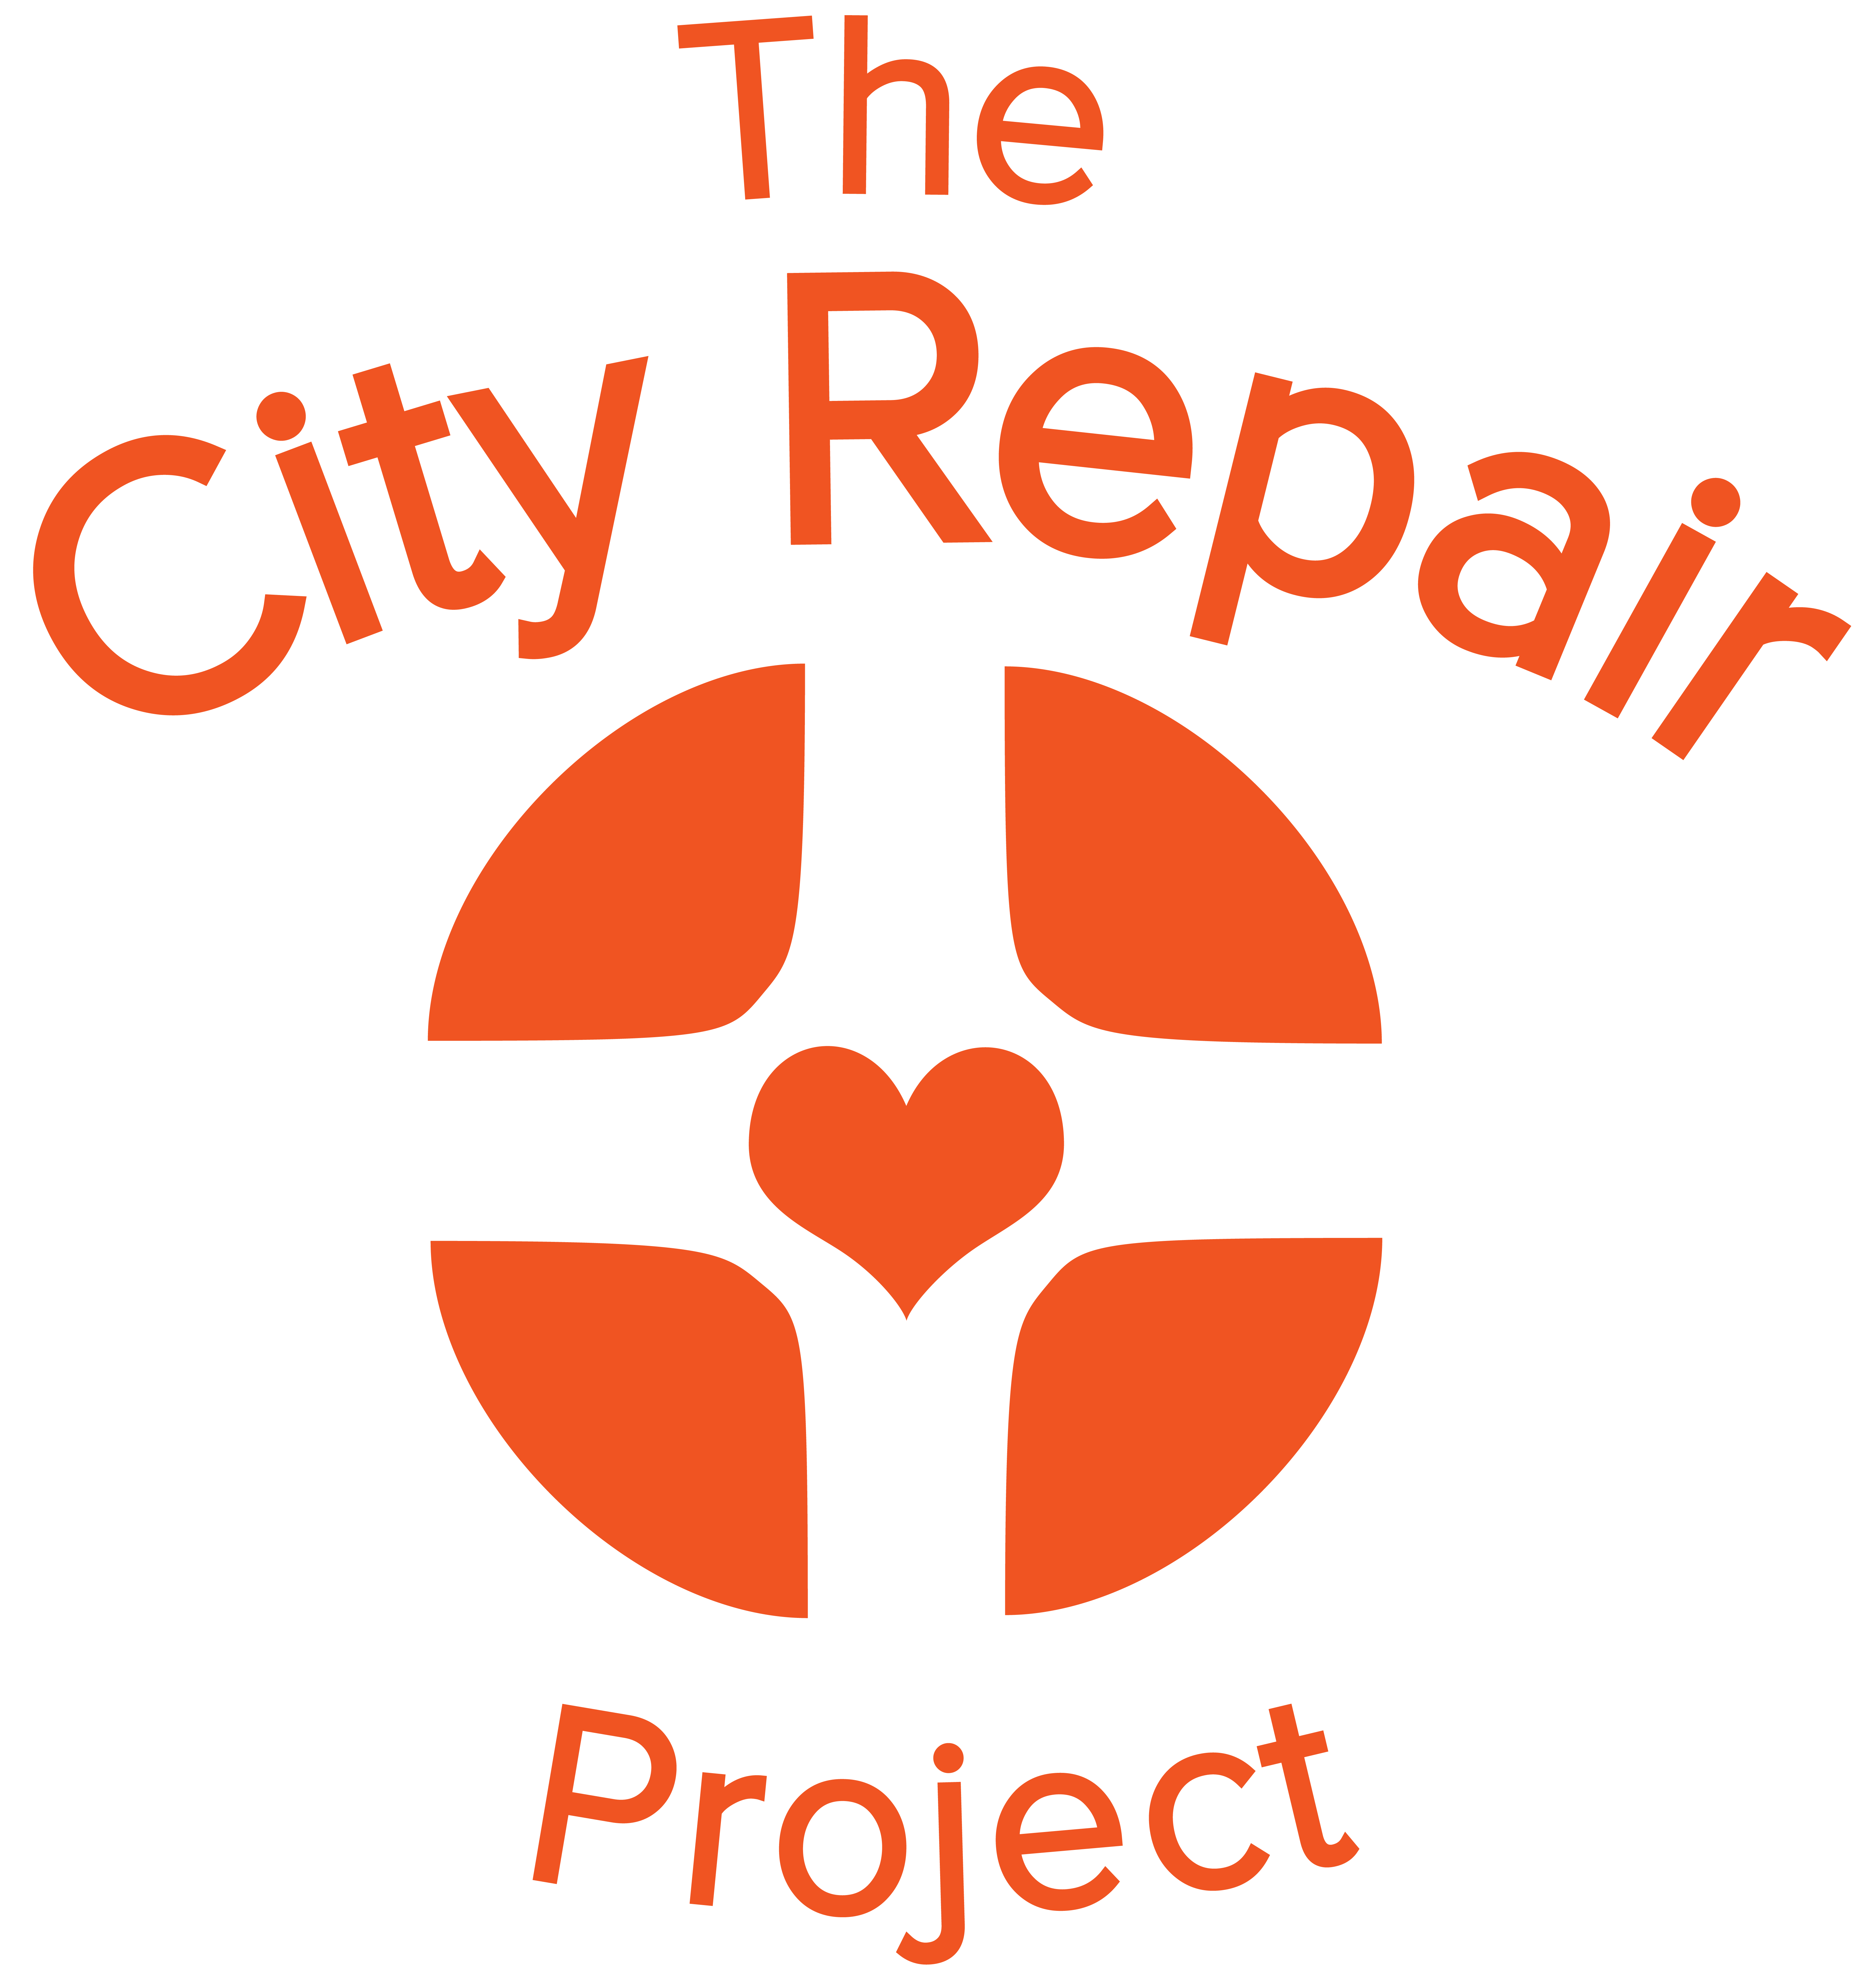 You are currently viewing City Repair Project